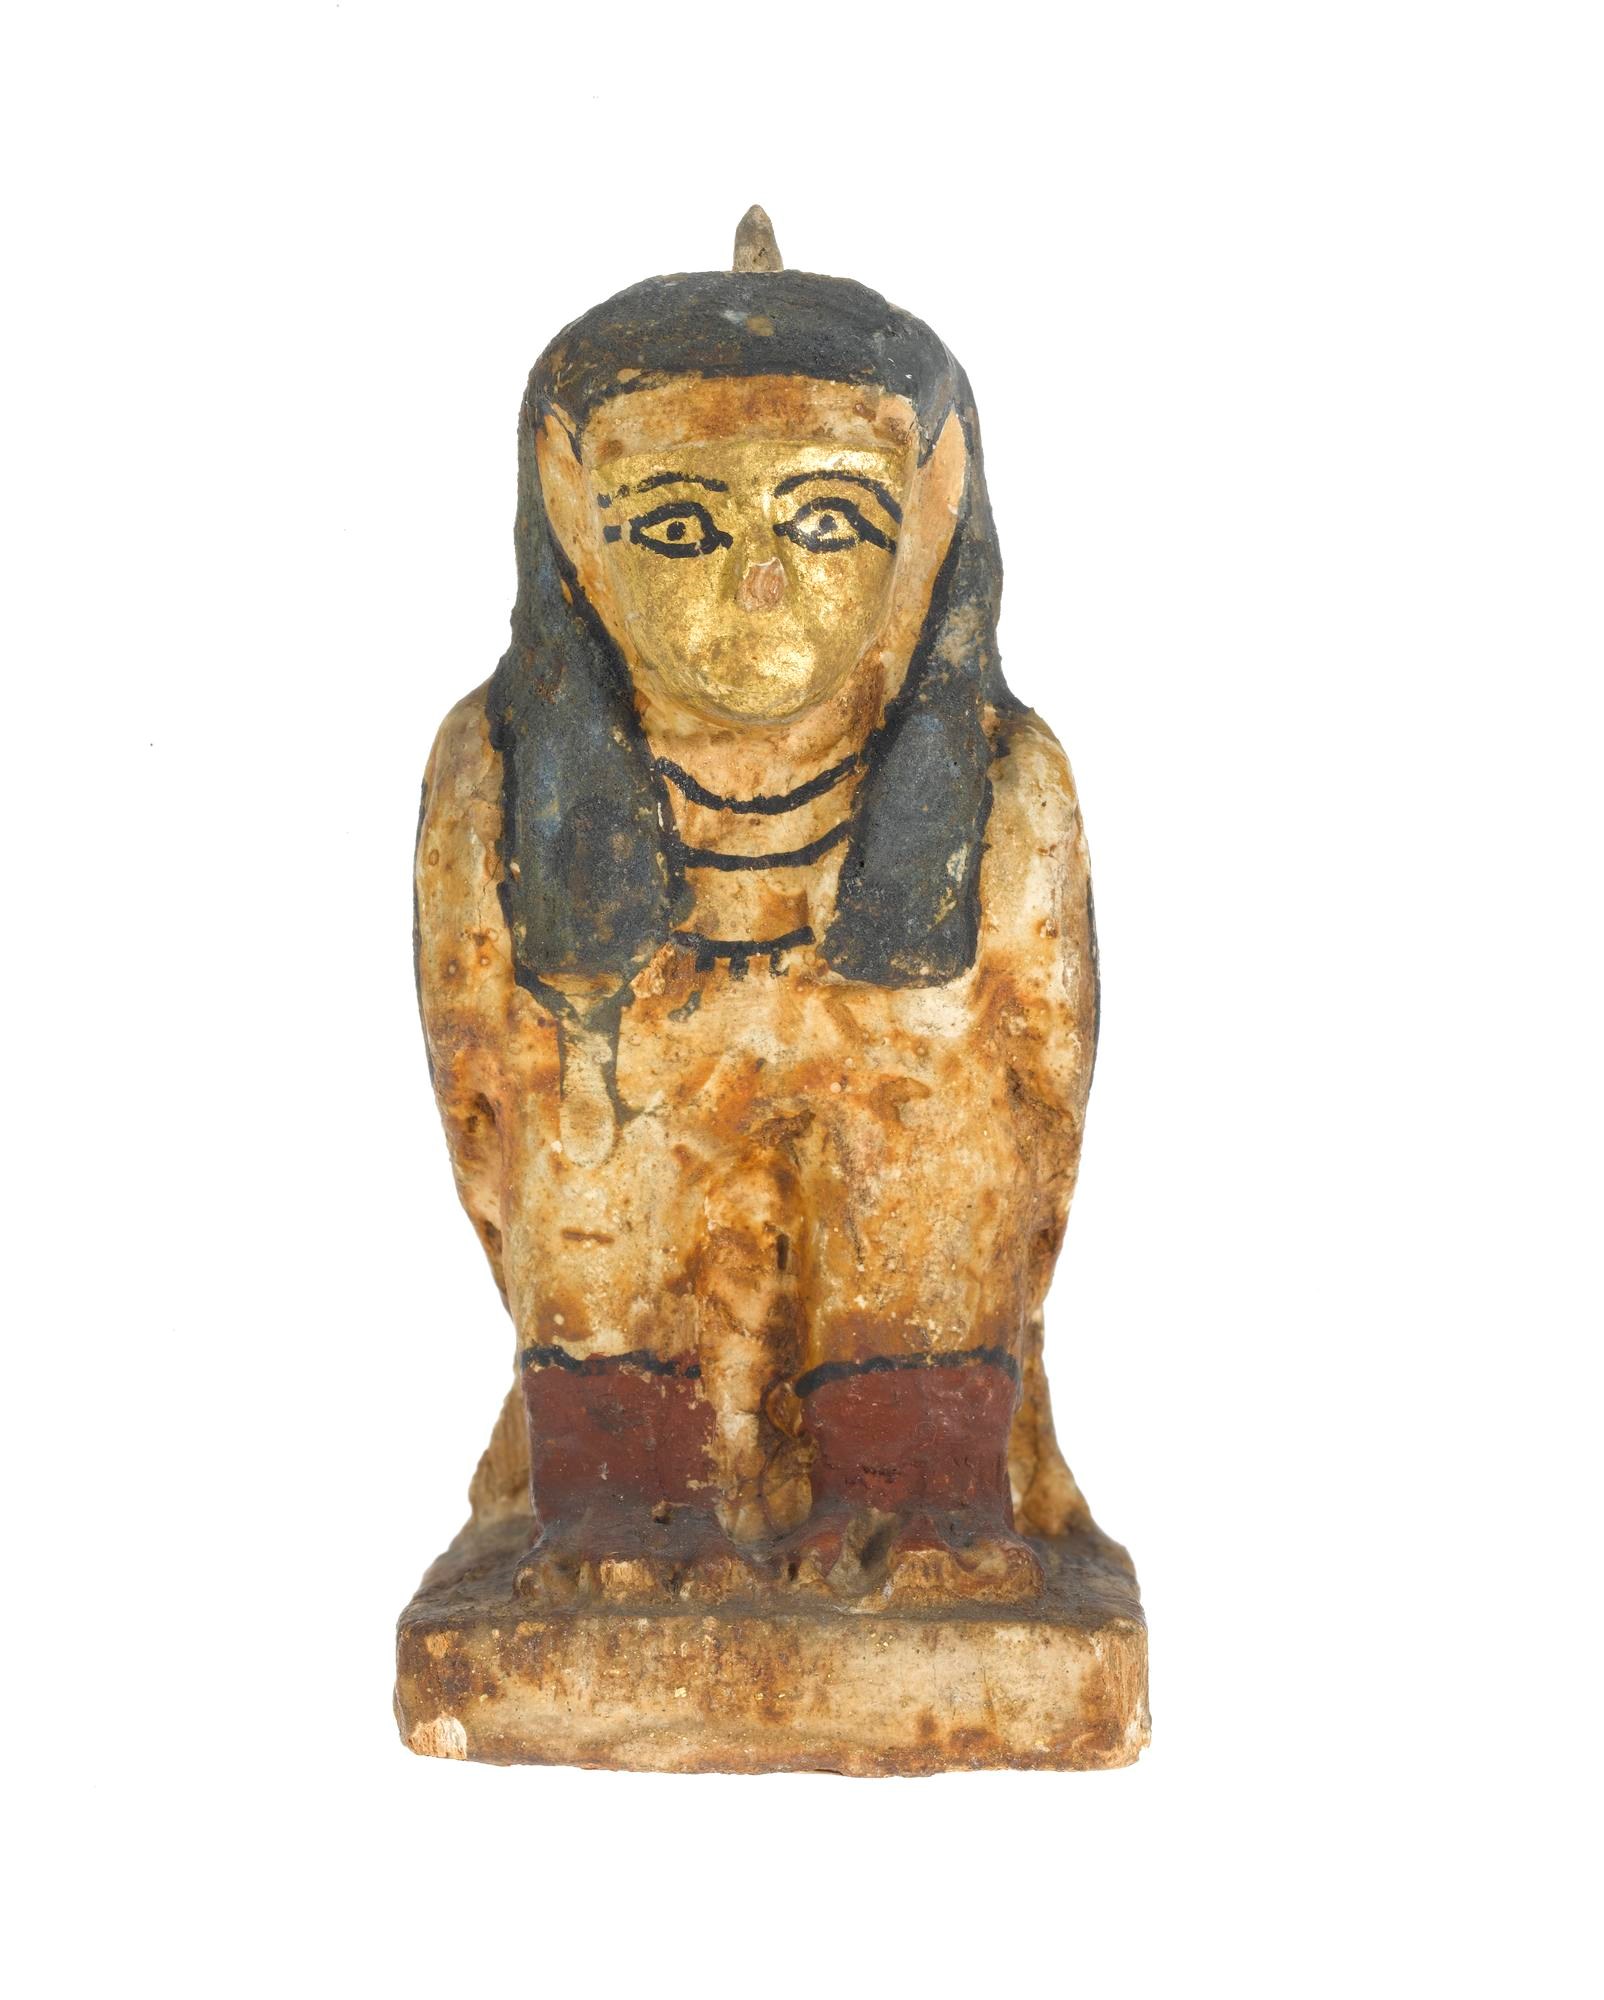 Painted wooden statuette of a ba-bird, with the body in the form of a falcon and the head in human form: Ancient Egyptian, probably from Akhmim, Late Period.